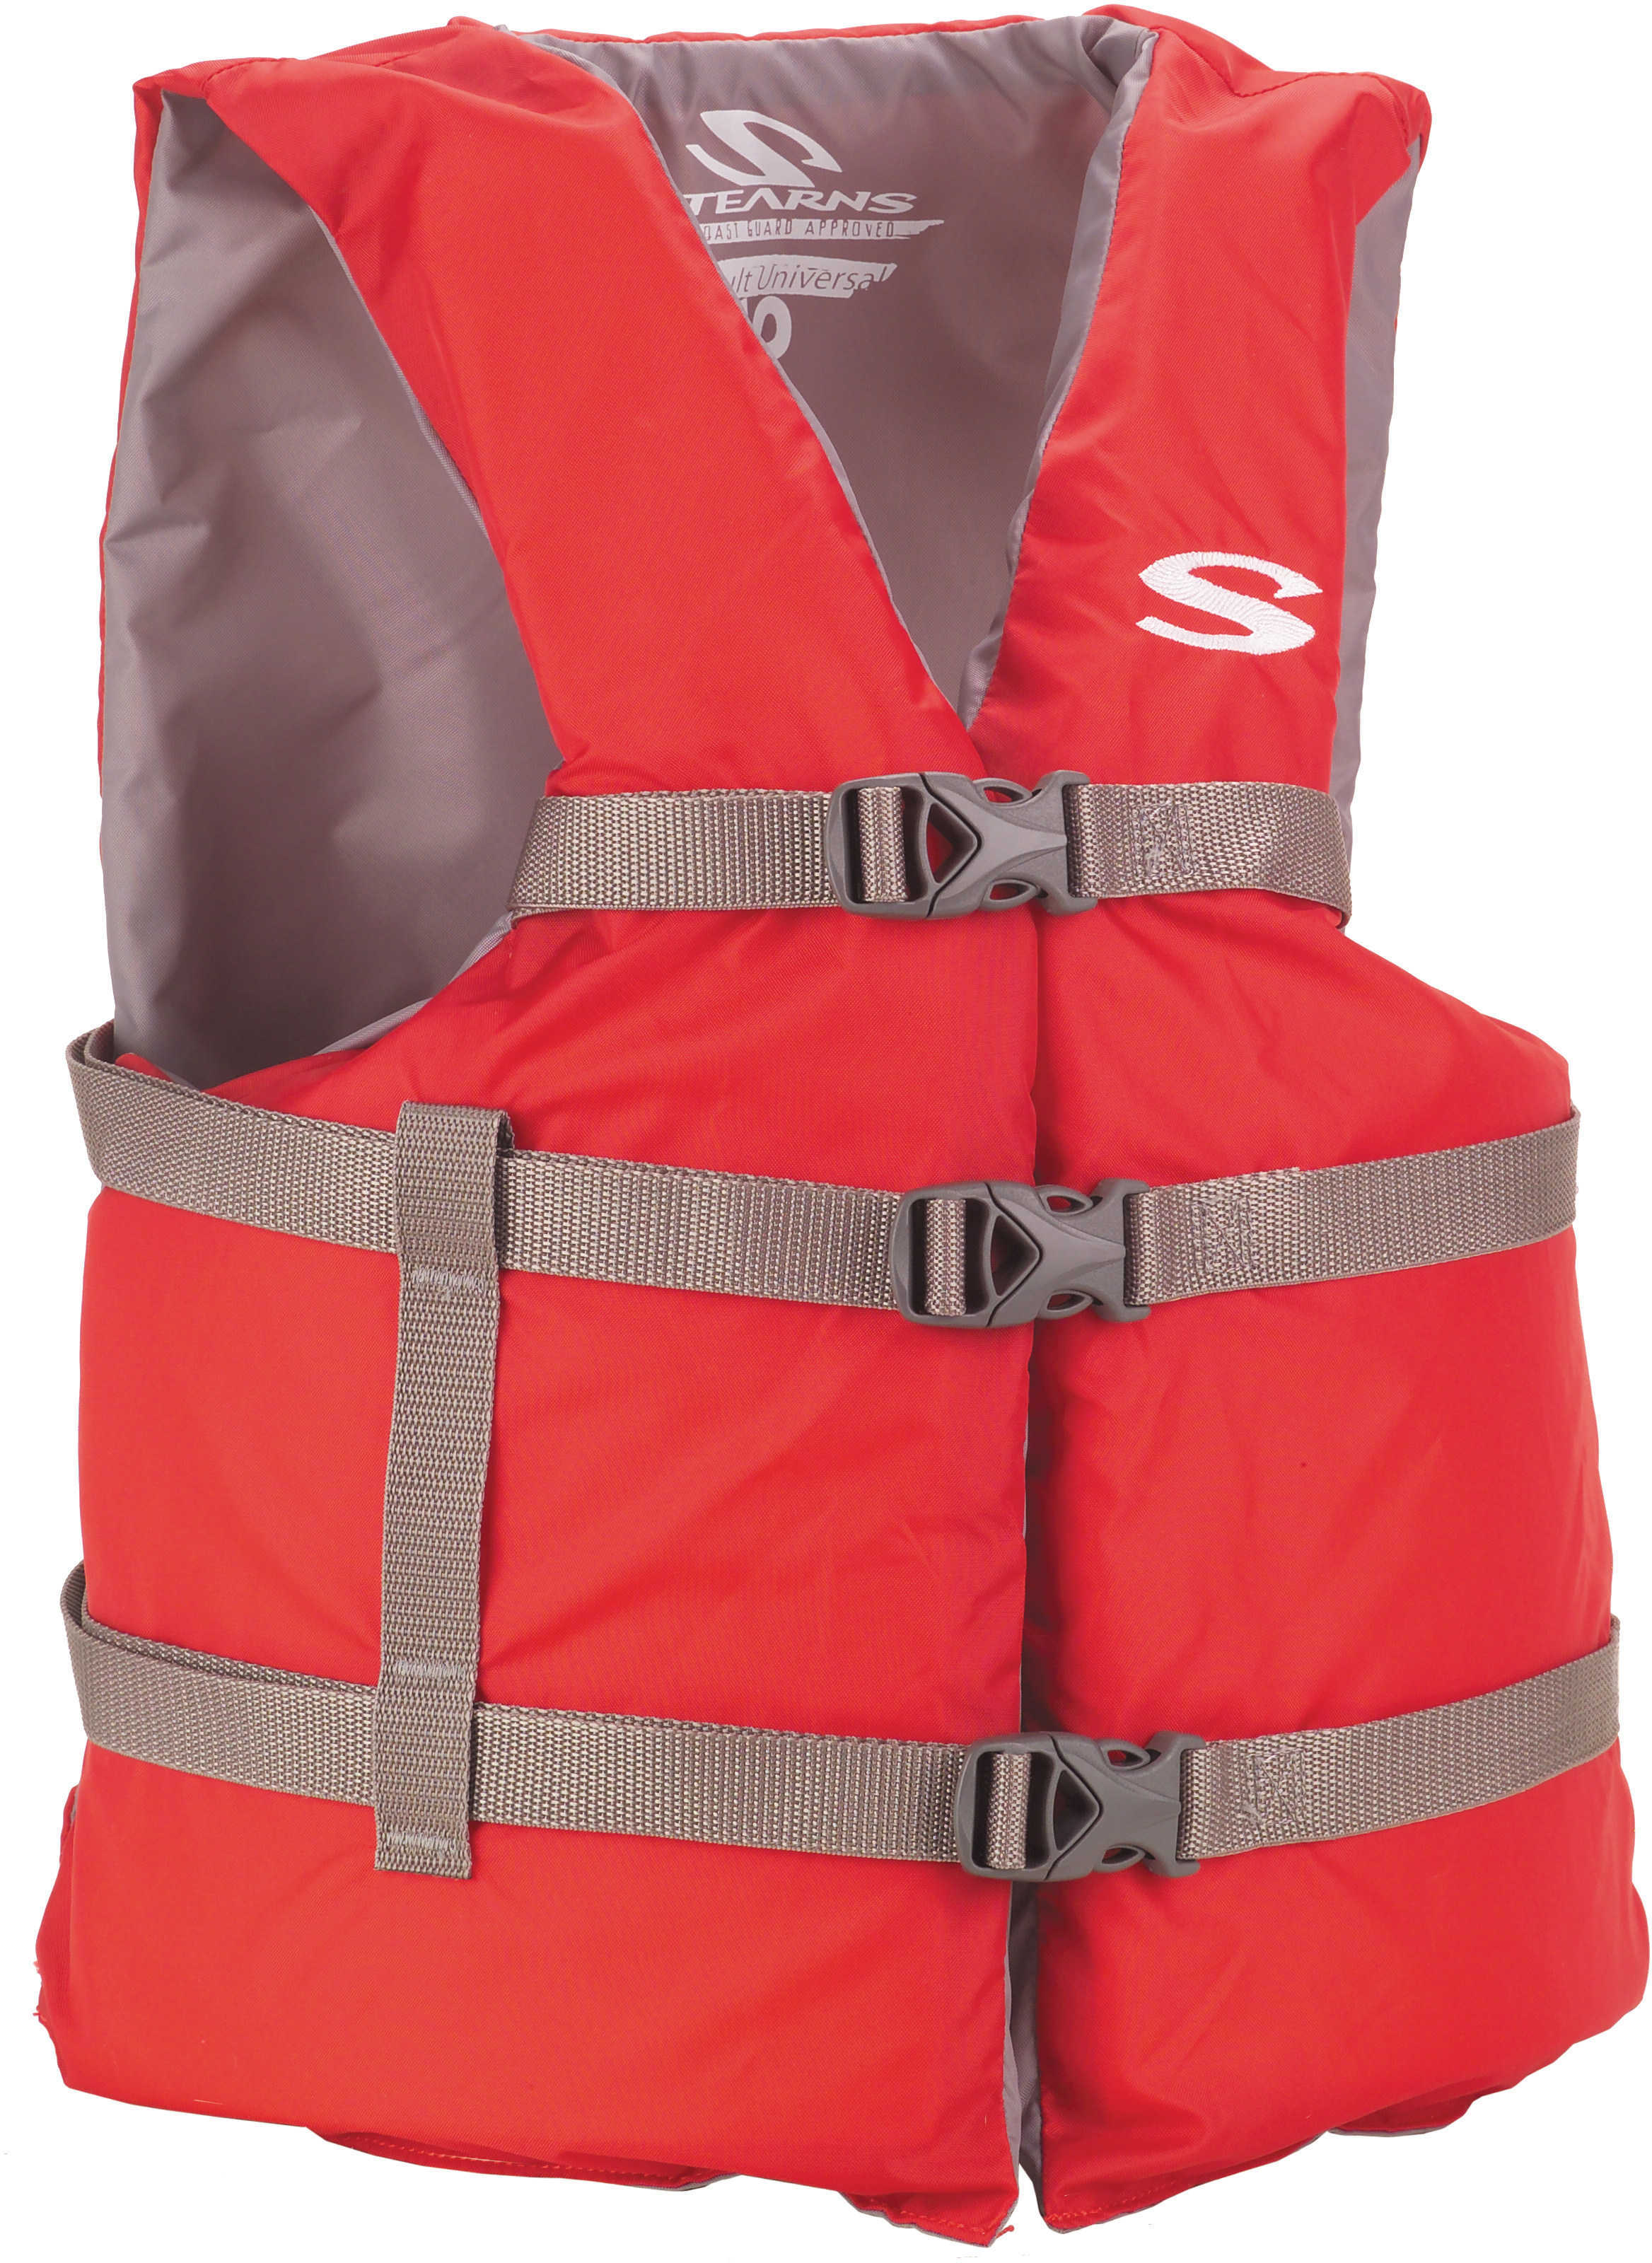 Stearns Adult Classic Boating PFD Red, Oversized Md: 3000001413